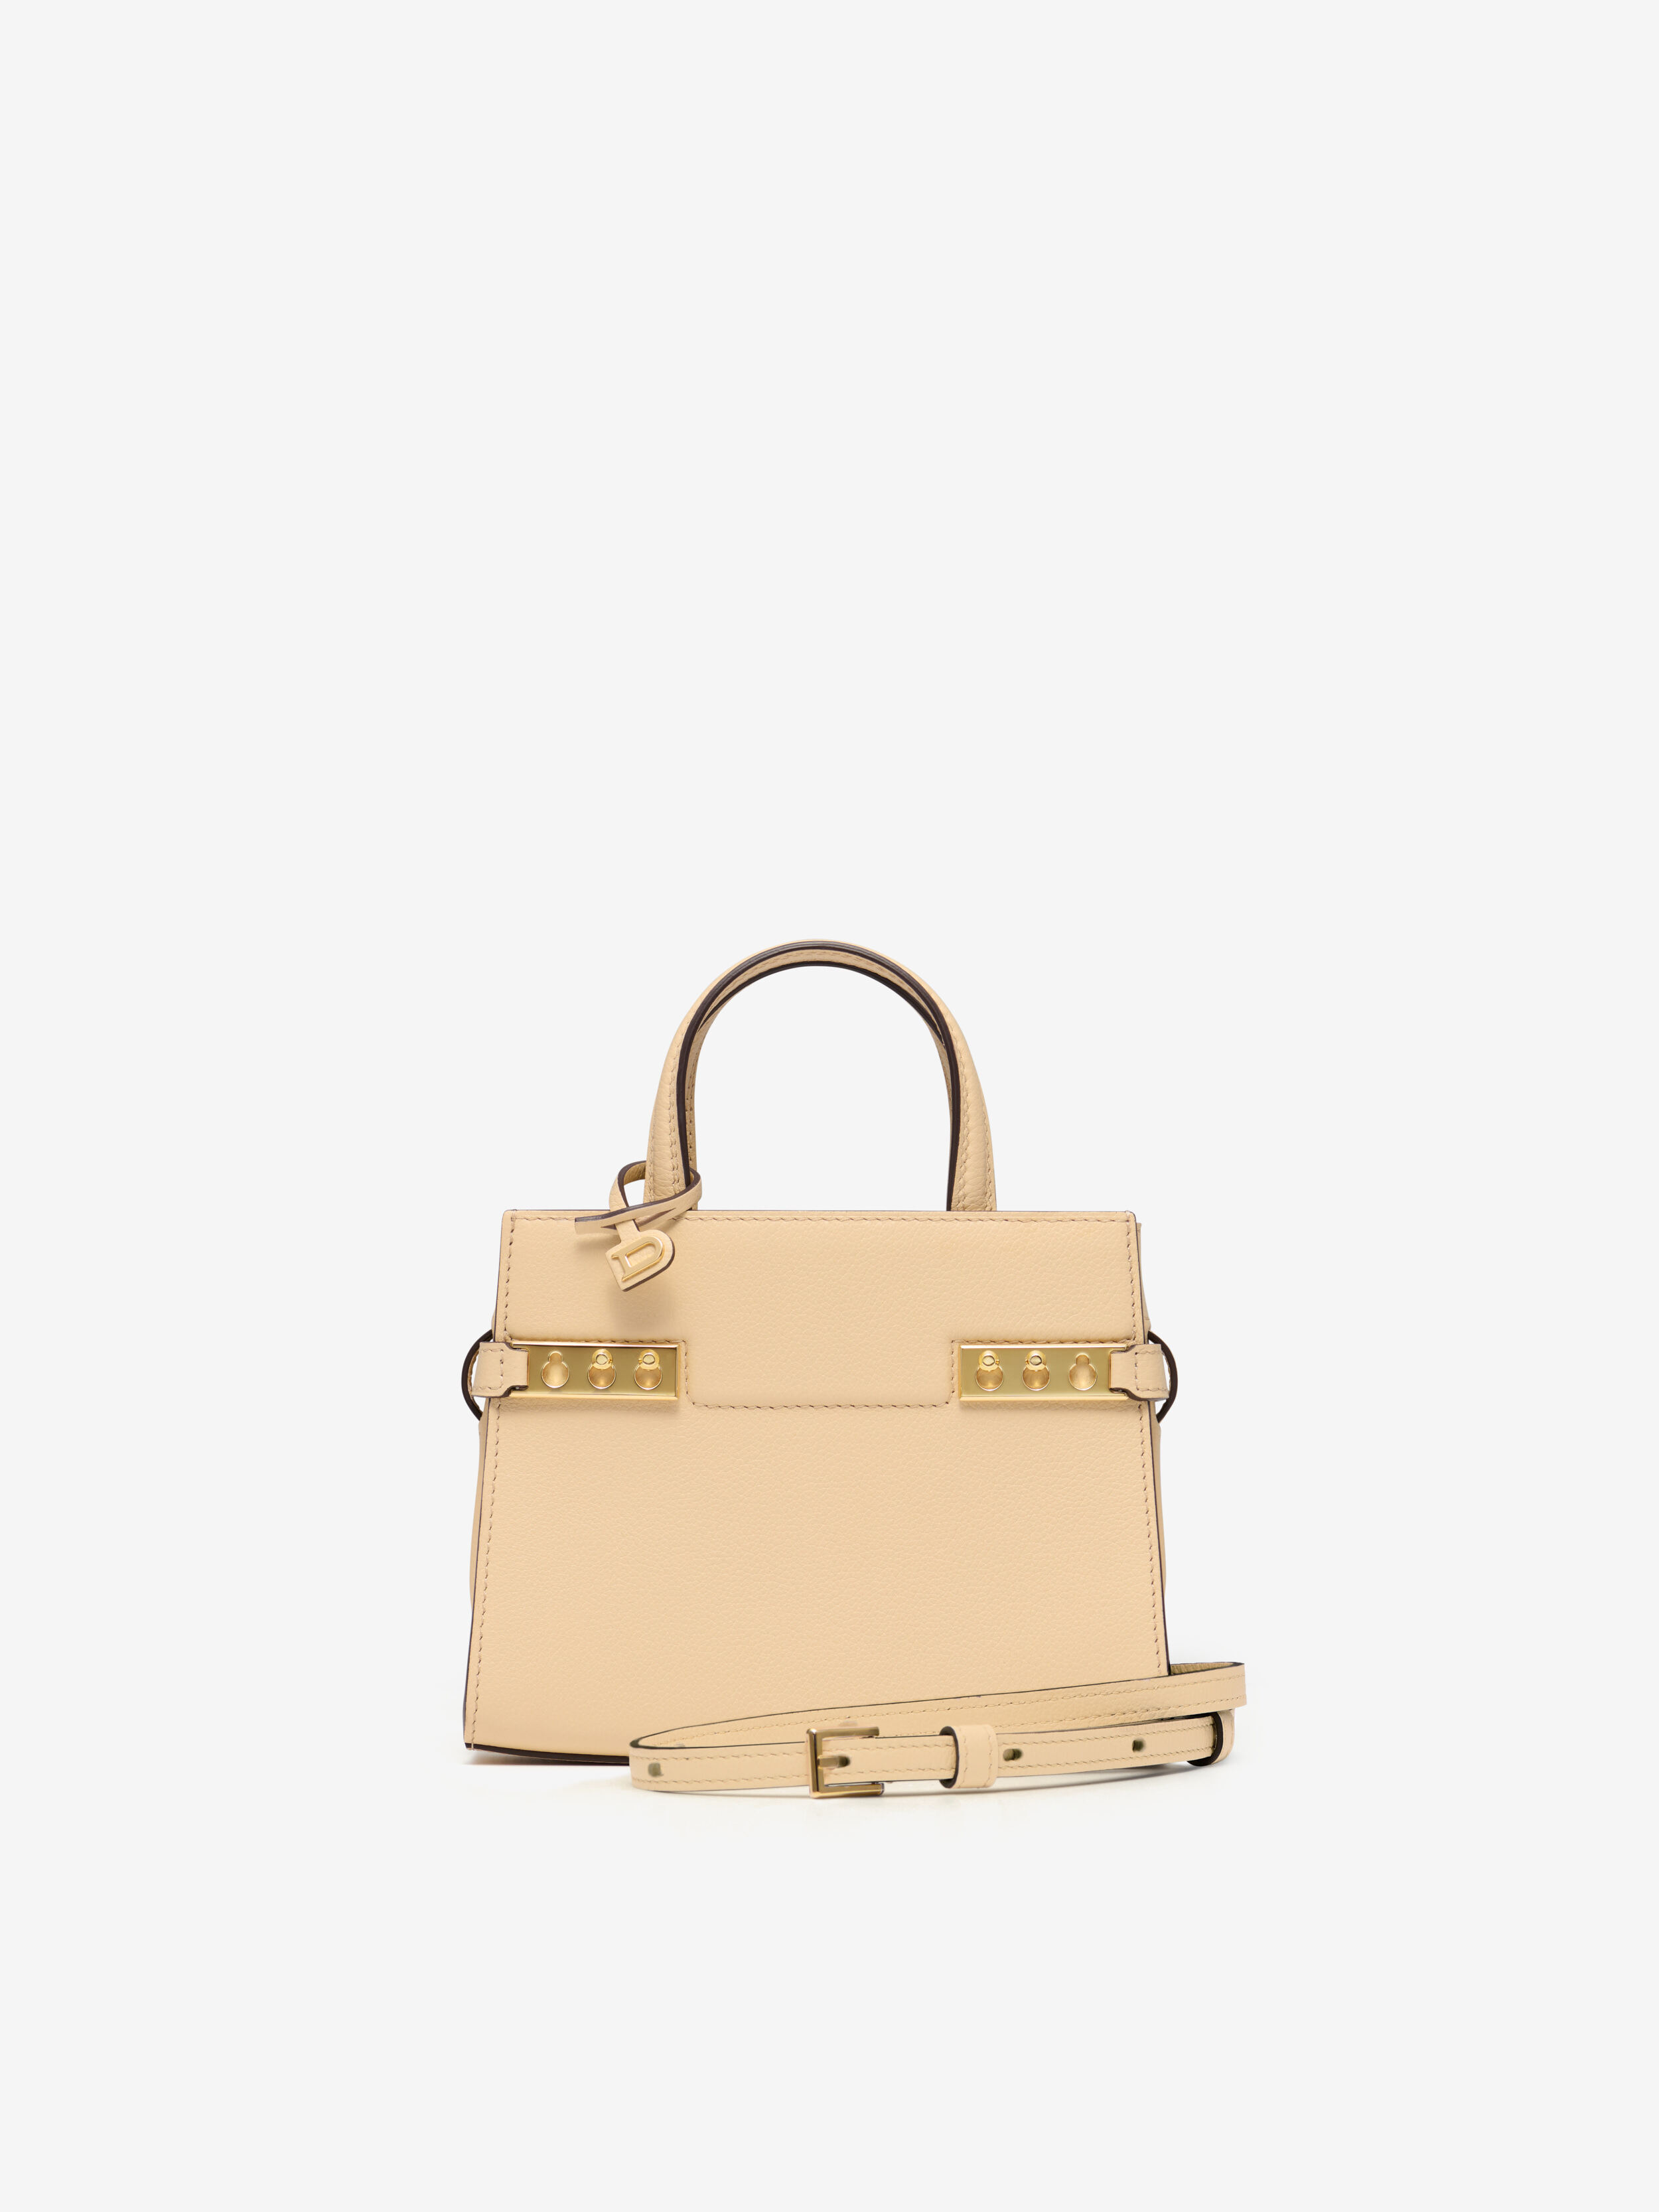 Delvaux Has A New Classic-In-The-Making Bag Called The Lingot - BAGAHOLICBOY